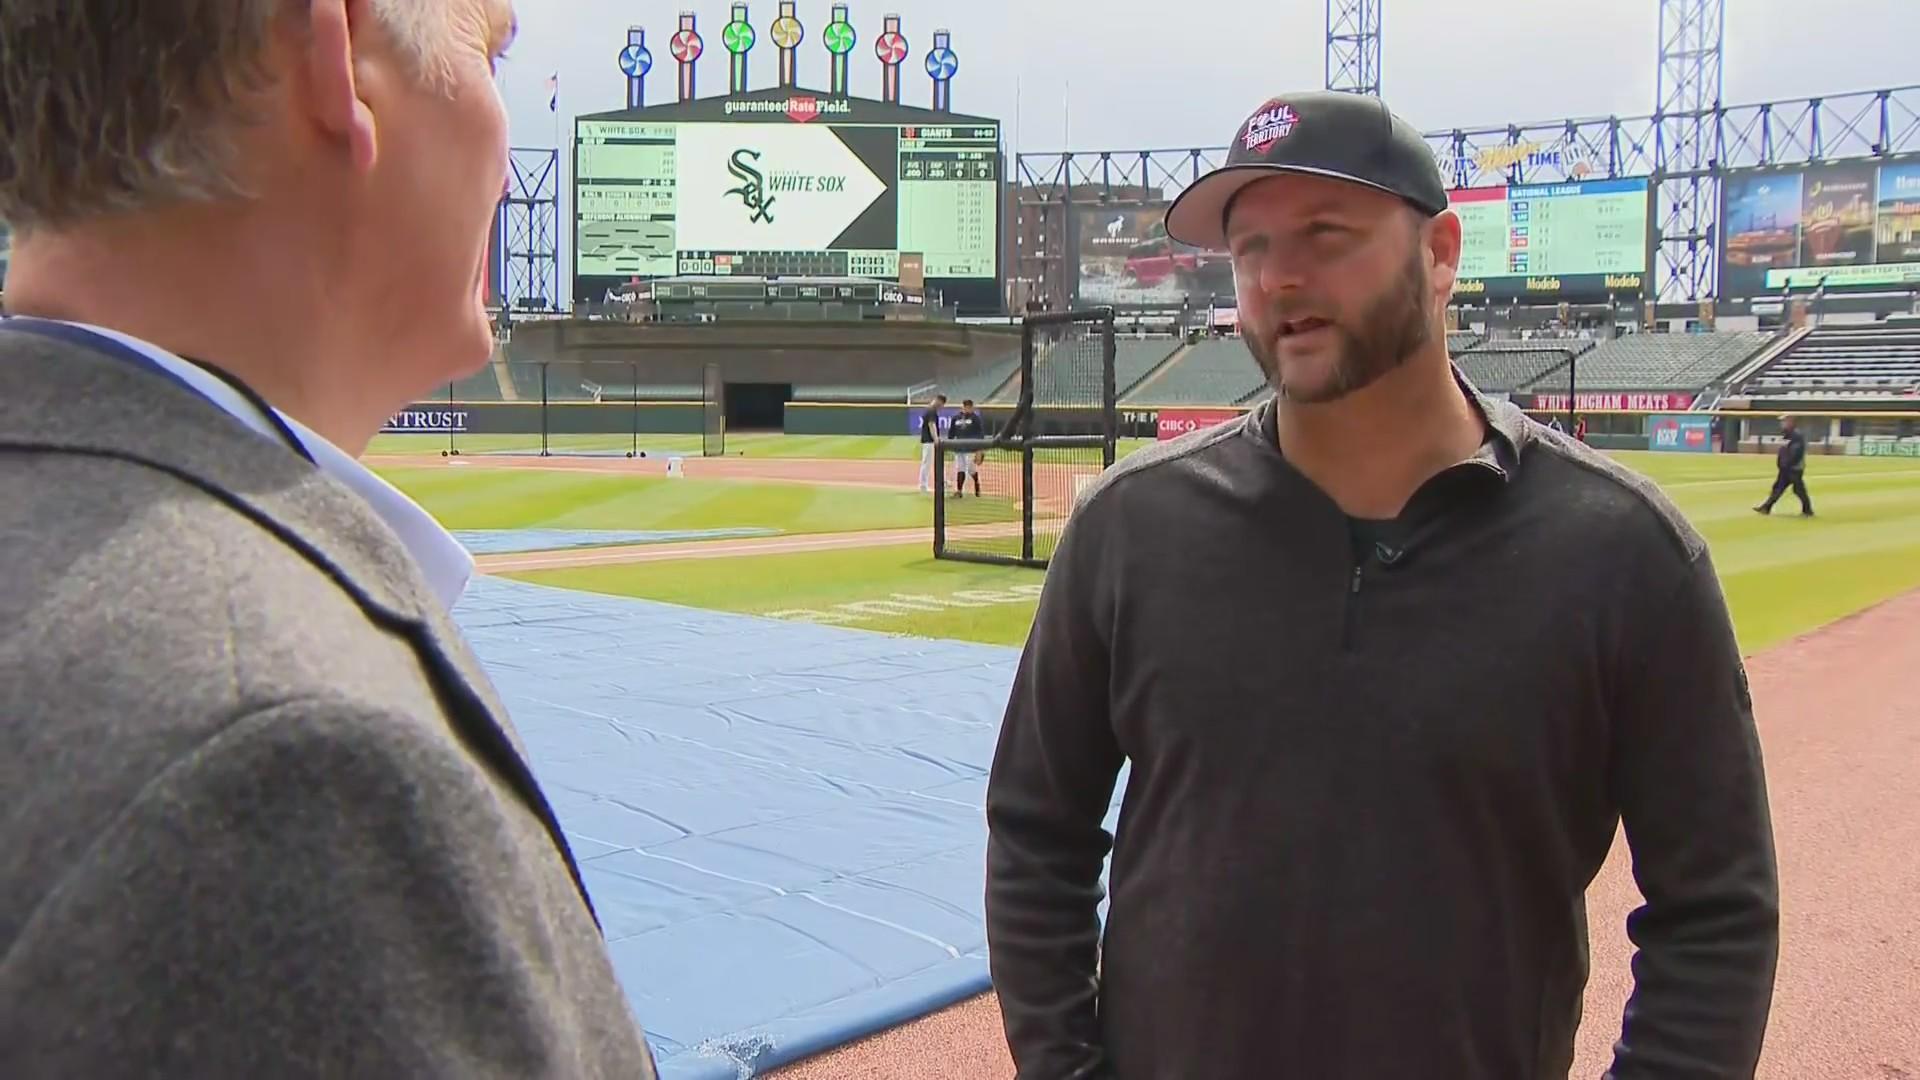 White Sox great A.J. Pierzynski gives his take on the team, new